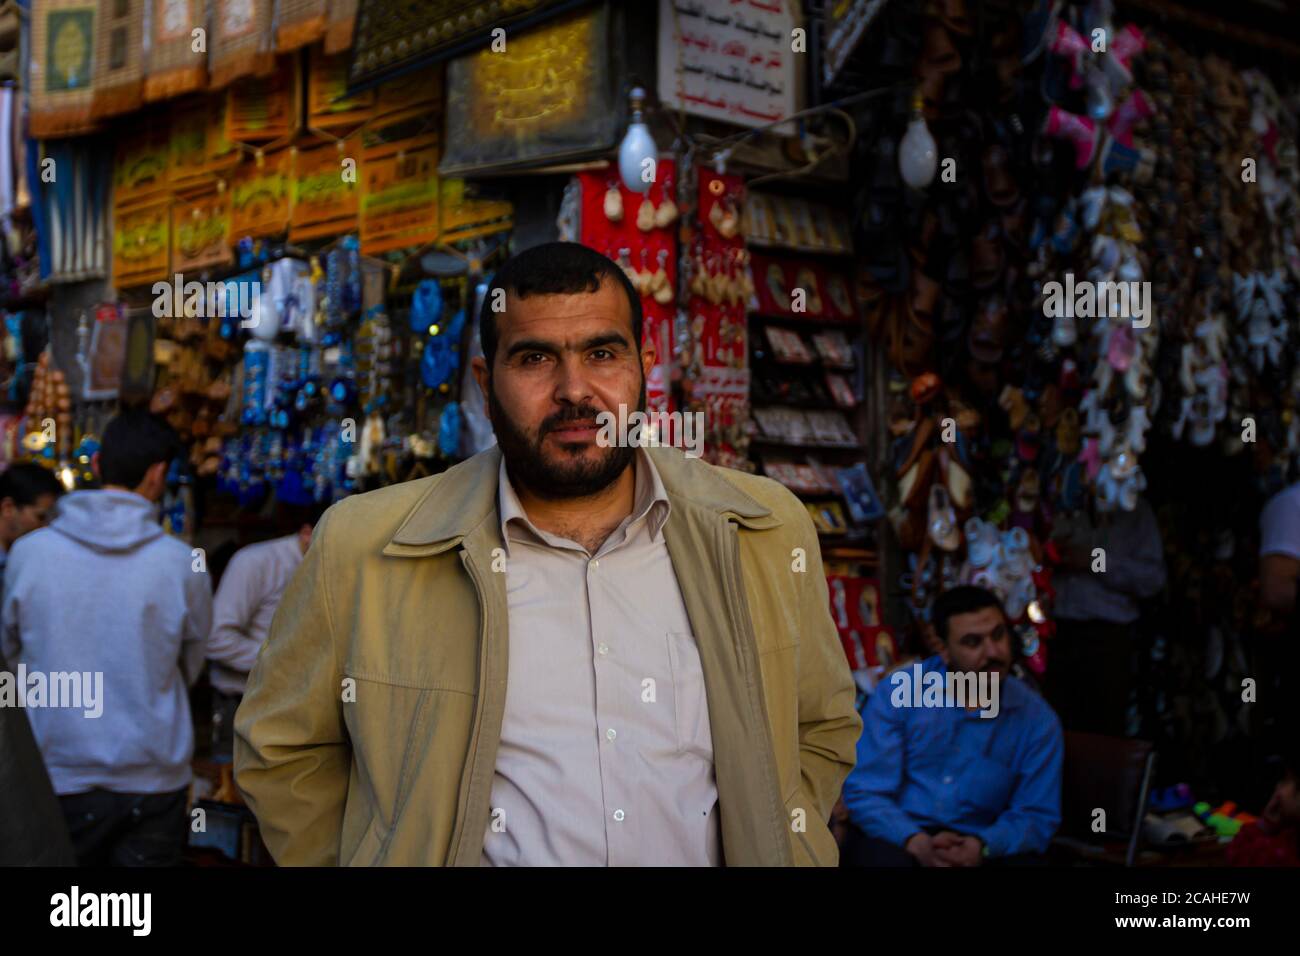 Damascus, Syria 03/28/2010: Selective focus portrait of a bearded Syrian shopkeeper in Al Hamidiyah Souq as he stands in front of  displays of shops s Stock Photo